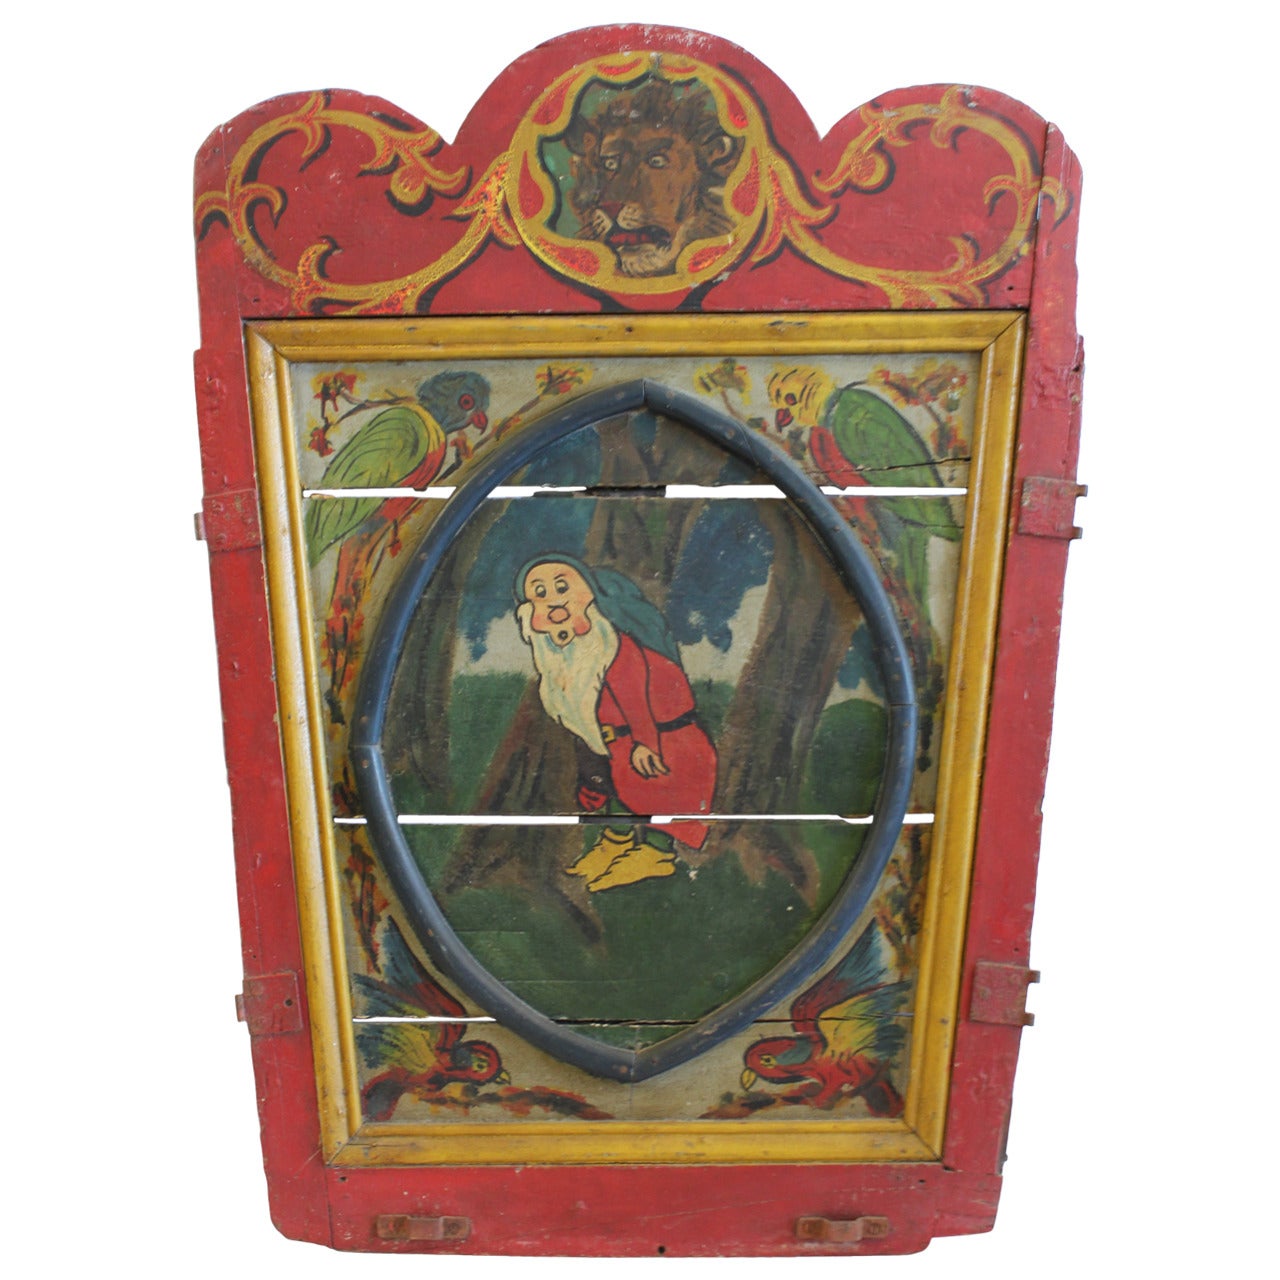 1940s Carnival Ride Door with a Snow White Scene